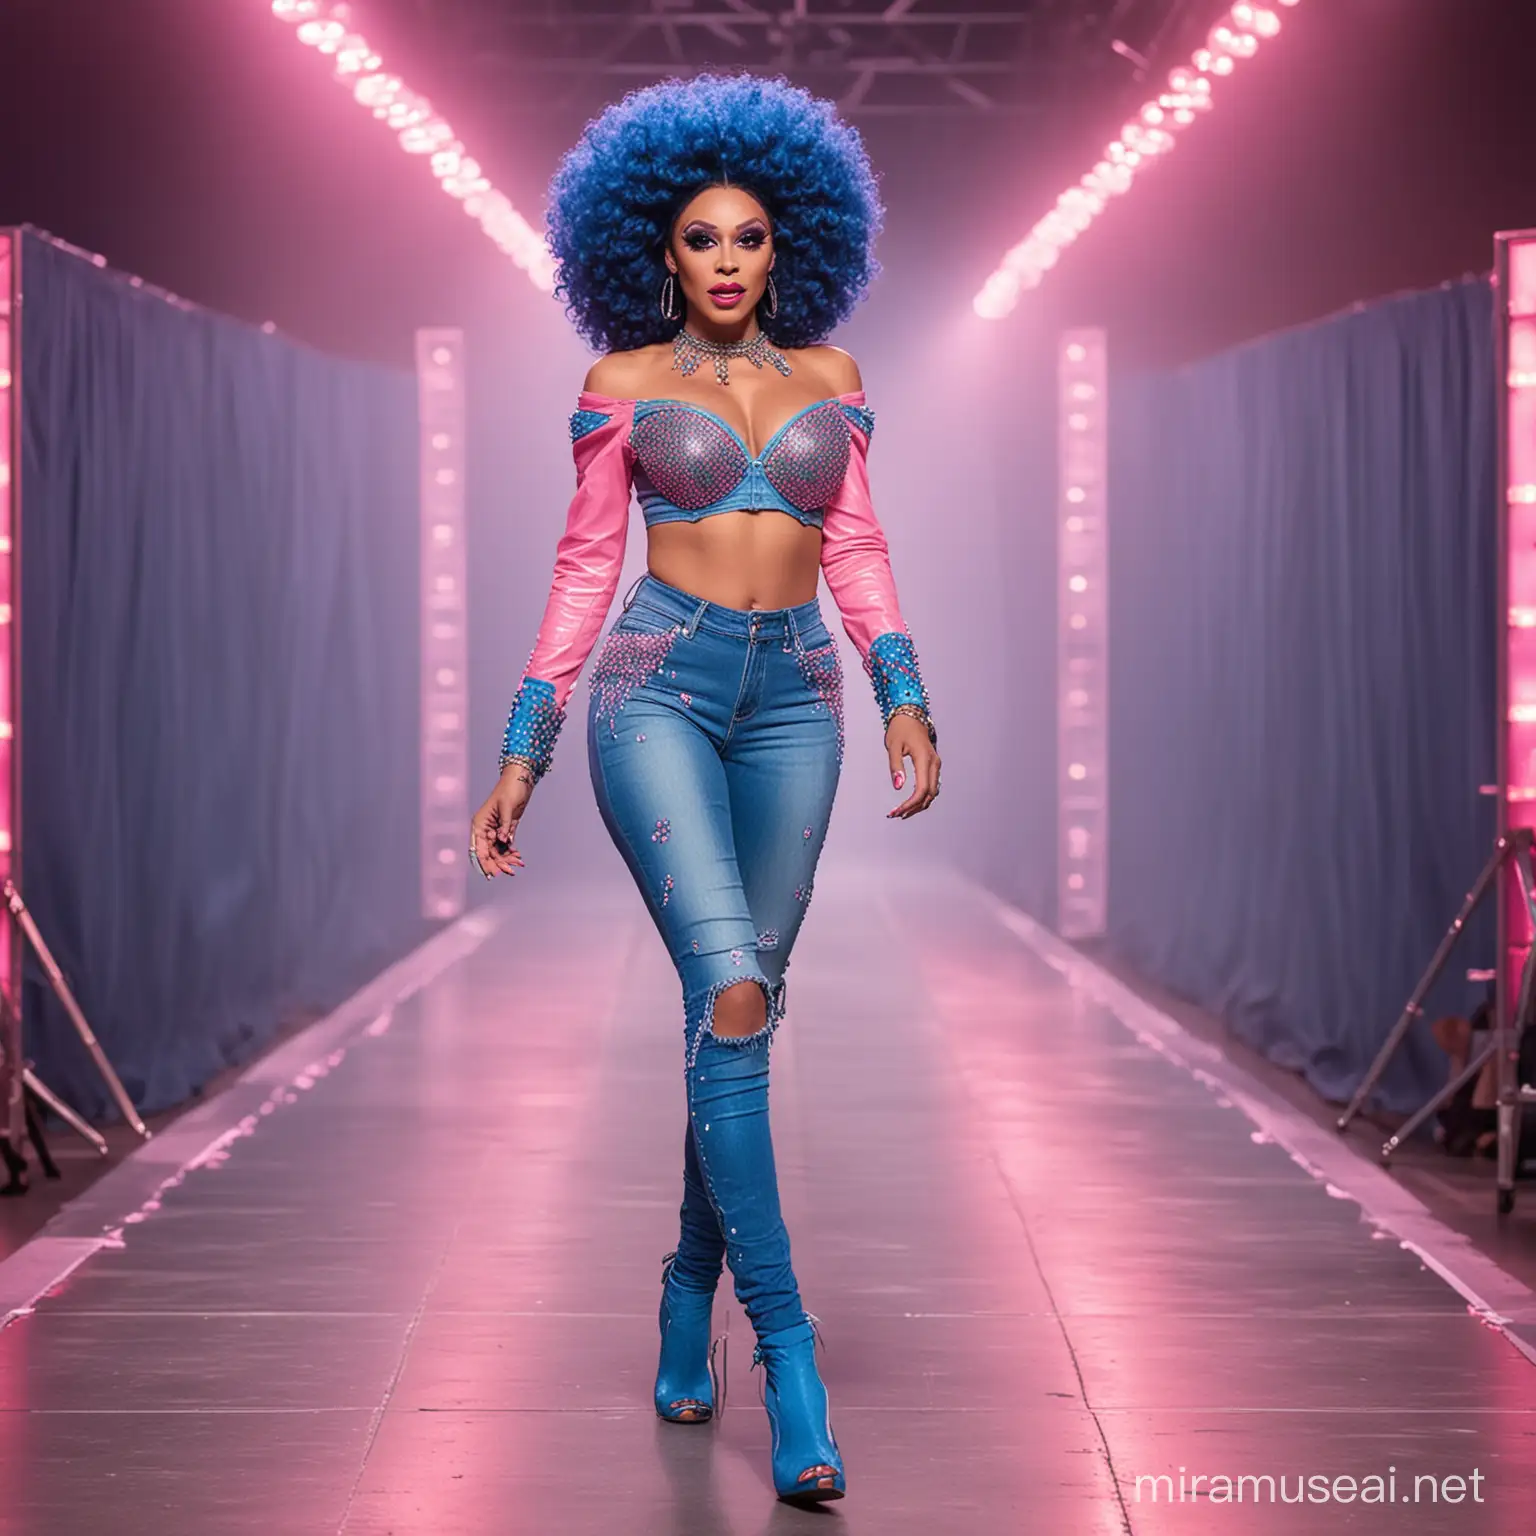 a full body image of a skinny brazilian neon drag queen walking on the Rupaul's Drag race runway wearing an outfit inspired by the prompt: denim 